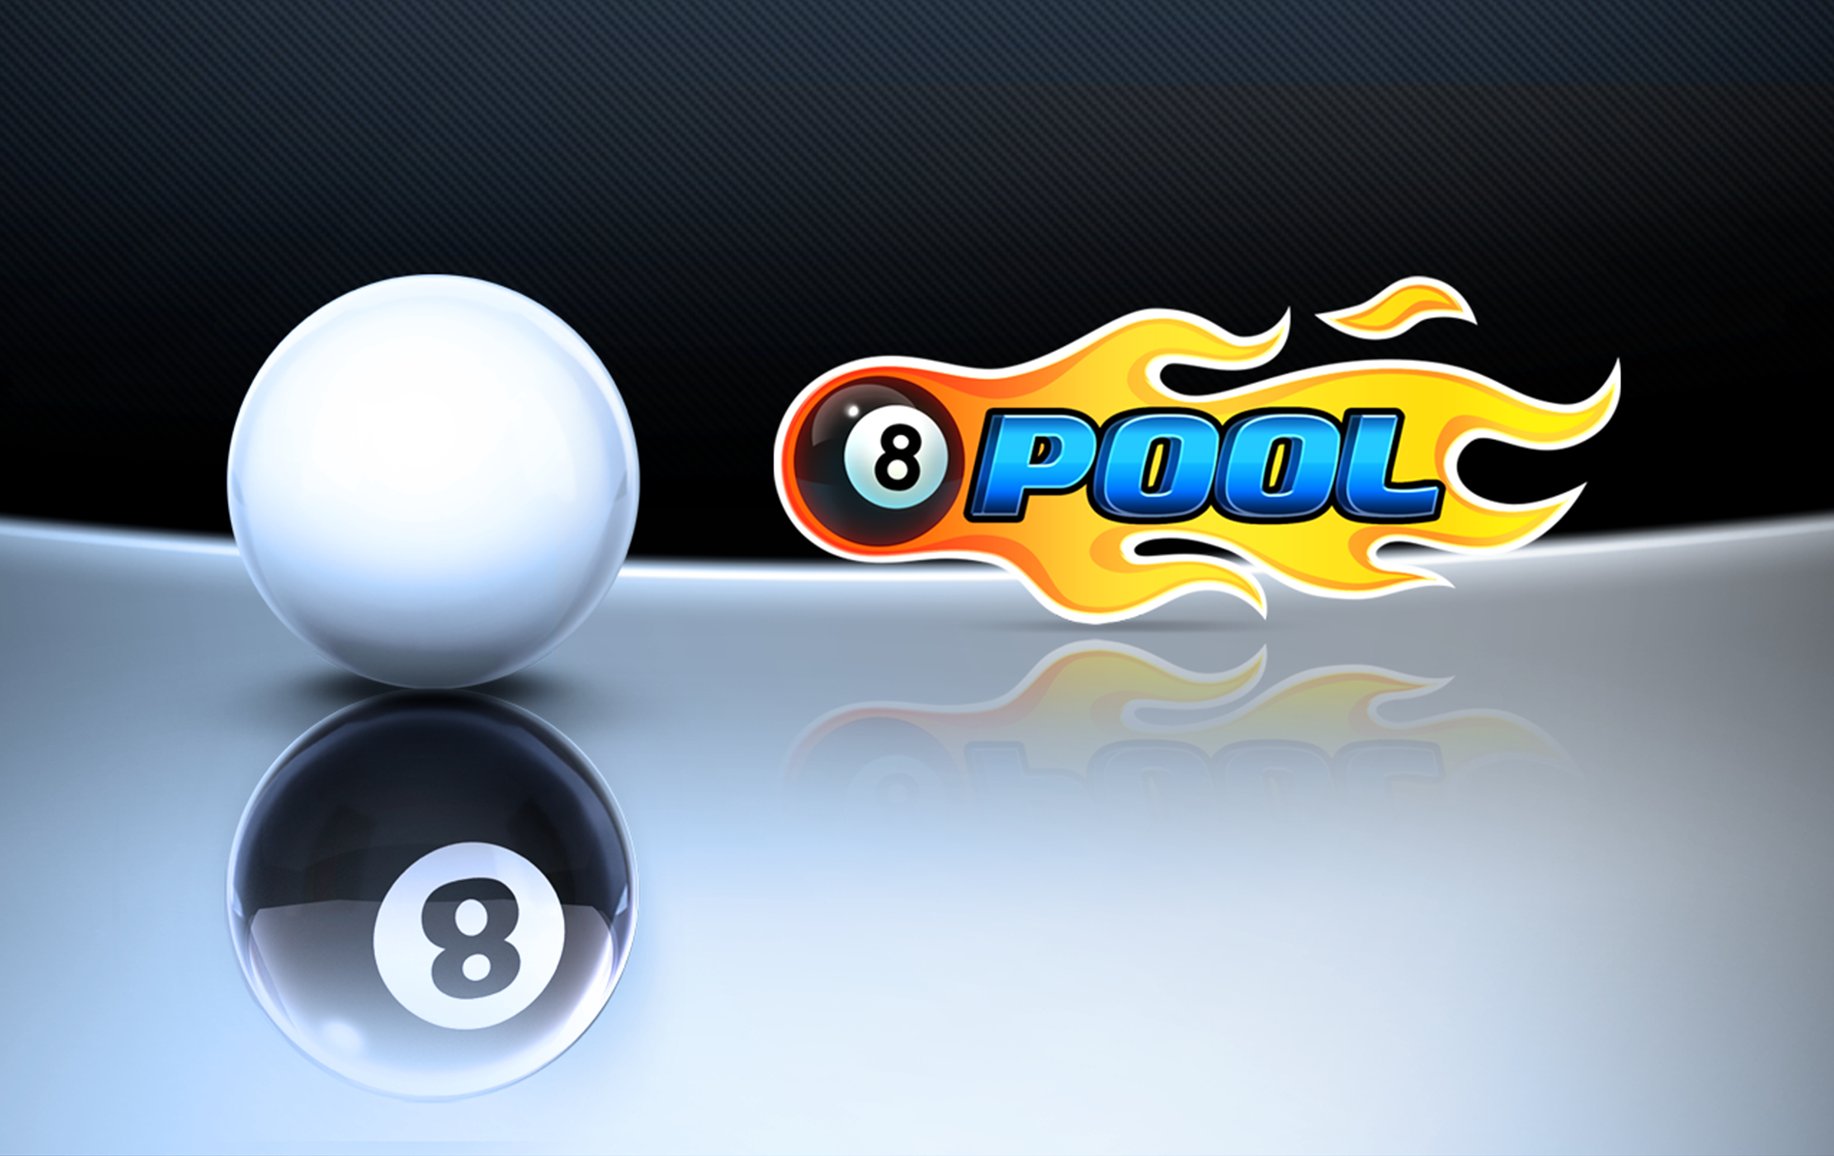 8 Ball Pool On Twitter It S Sunday Grab This Free Reward Now Https T Co A2jwm43epj